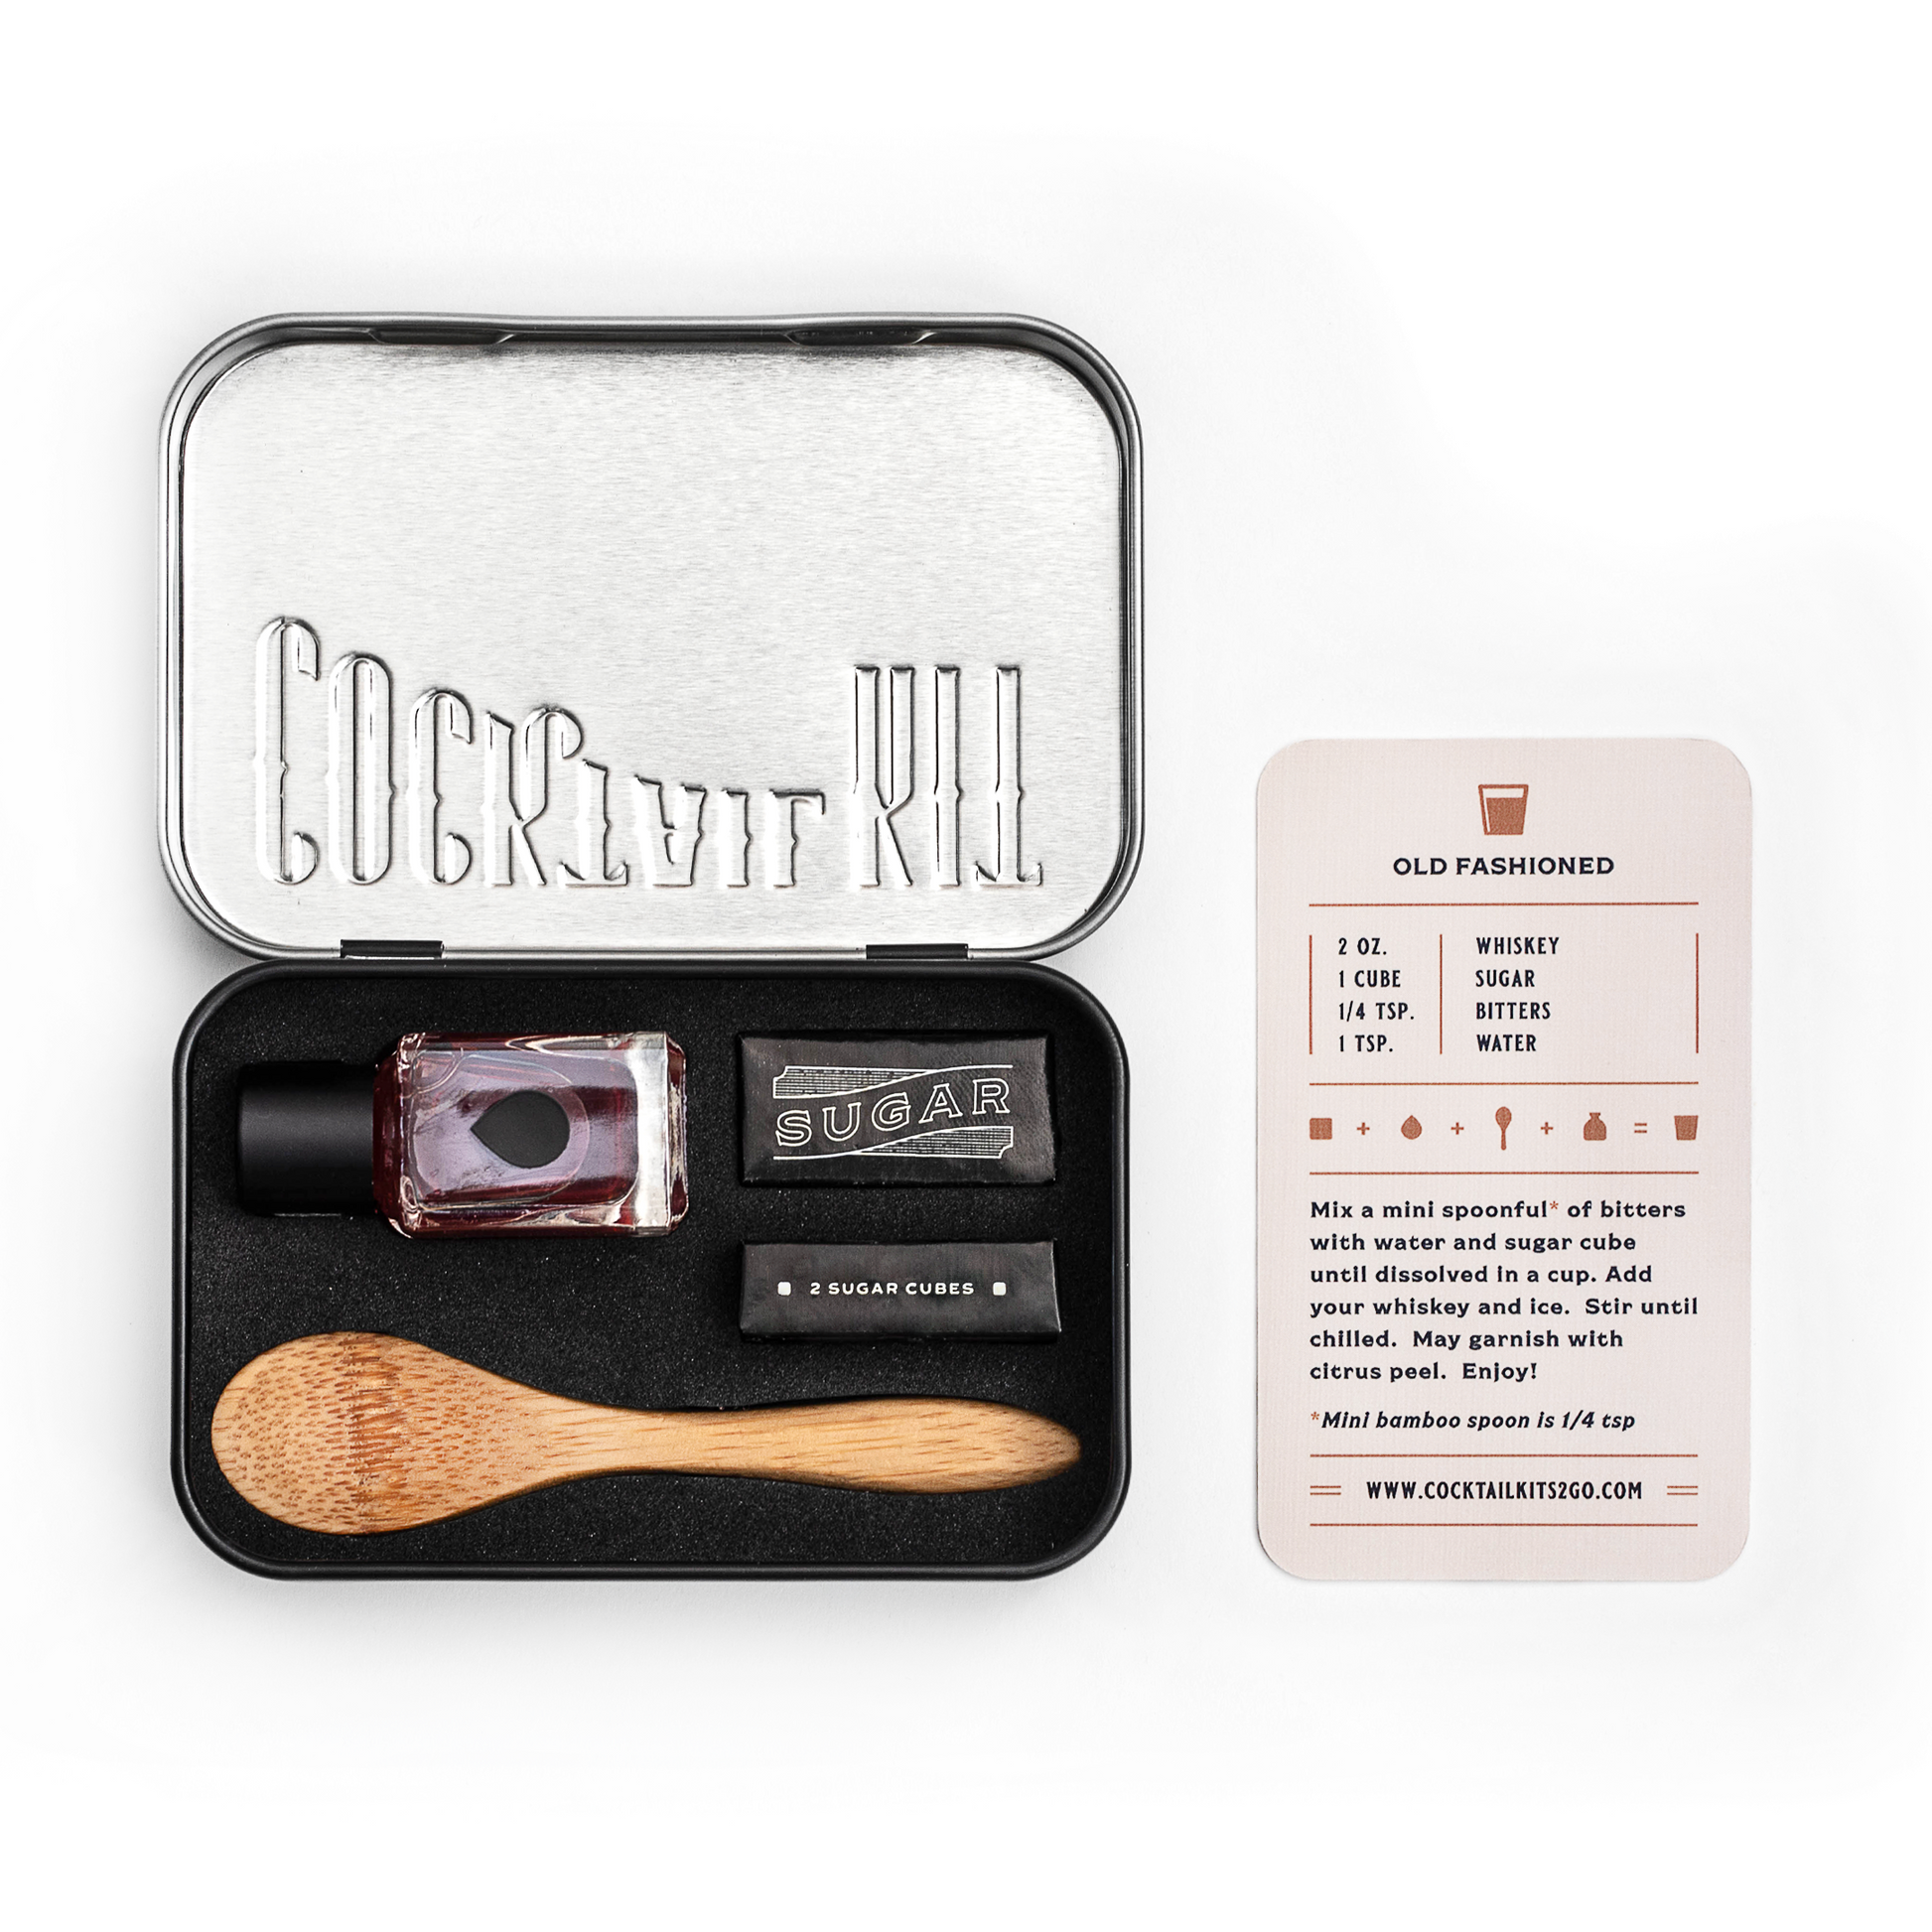 Old Fashioned Cocktail Kit with Case Opened and Recipe